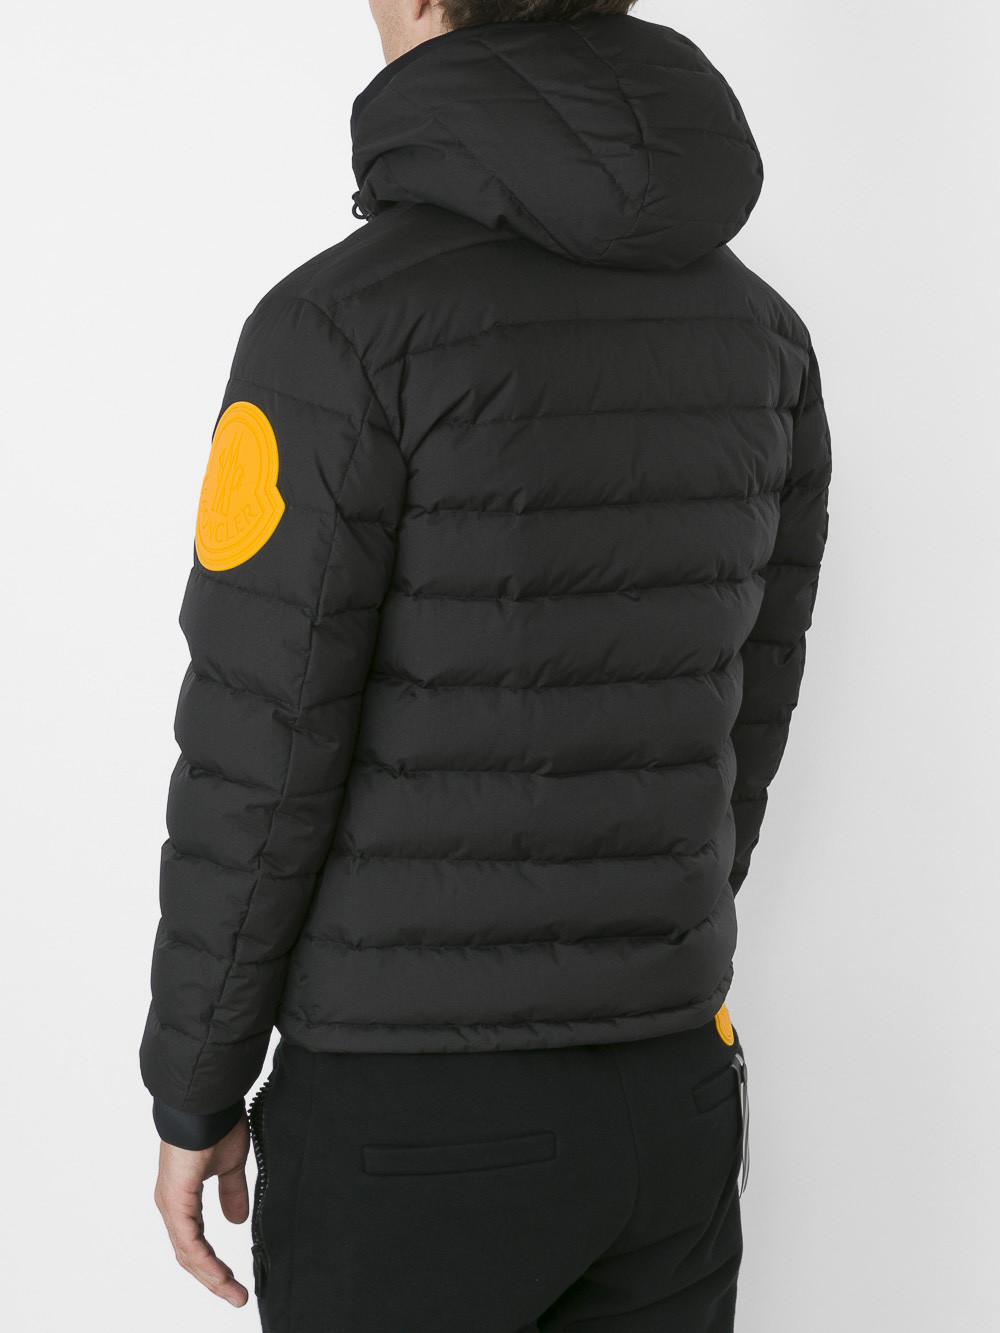 Moncler Off White Jacket Clearance, 55% OFF | powerofdance.com